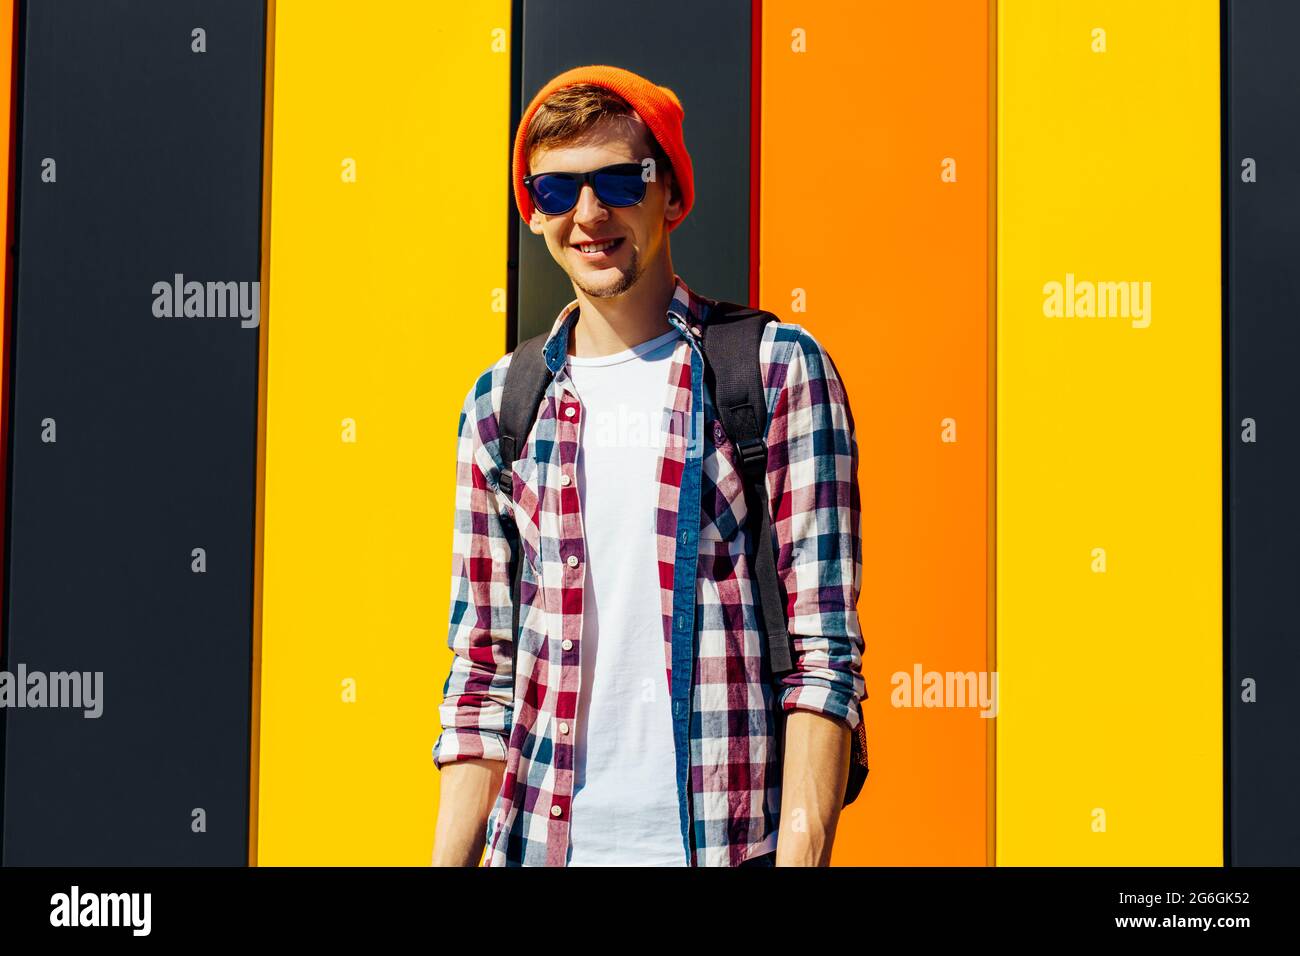 Young smiling hipster man in a hat and sunglasses, in stylish clothes with a briefcase, posing on a bright colored background Stock Photo